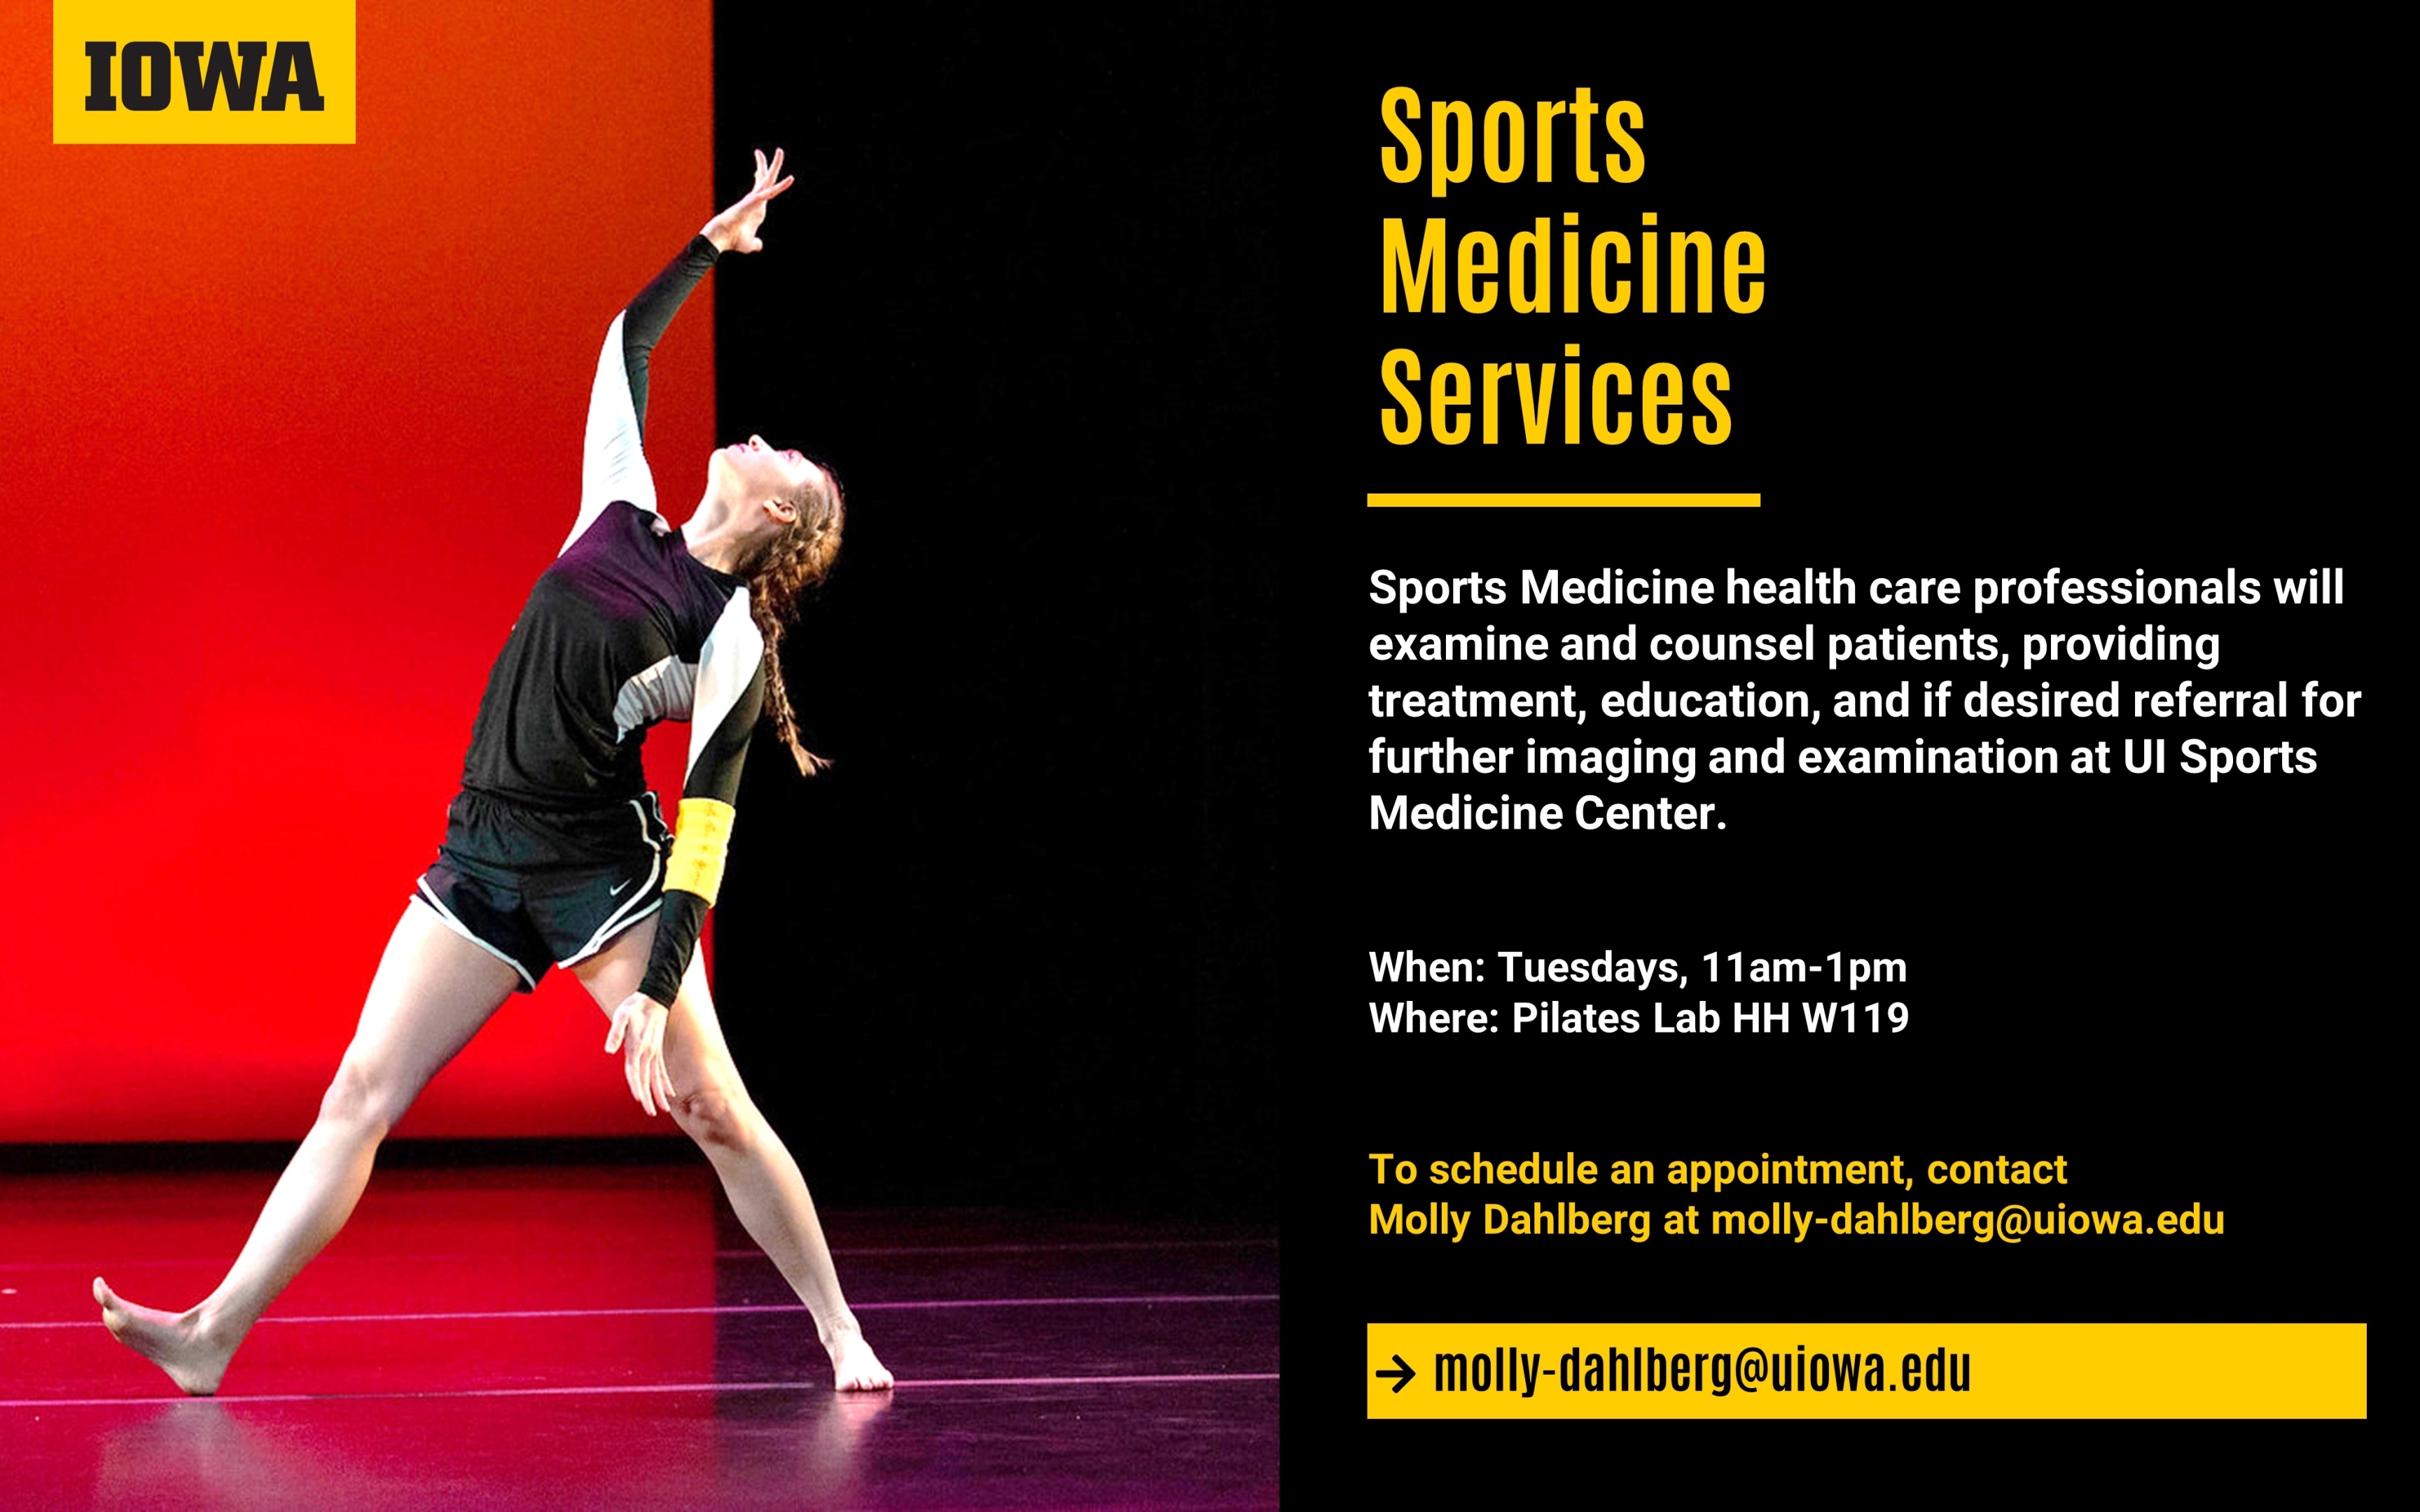 Sports Medicine Appointments available Tuesdays 11-1, HH W119, molly-dahlberg@uiowa.edu